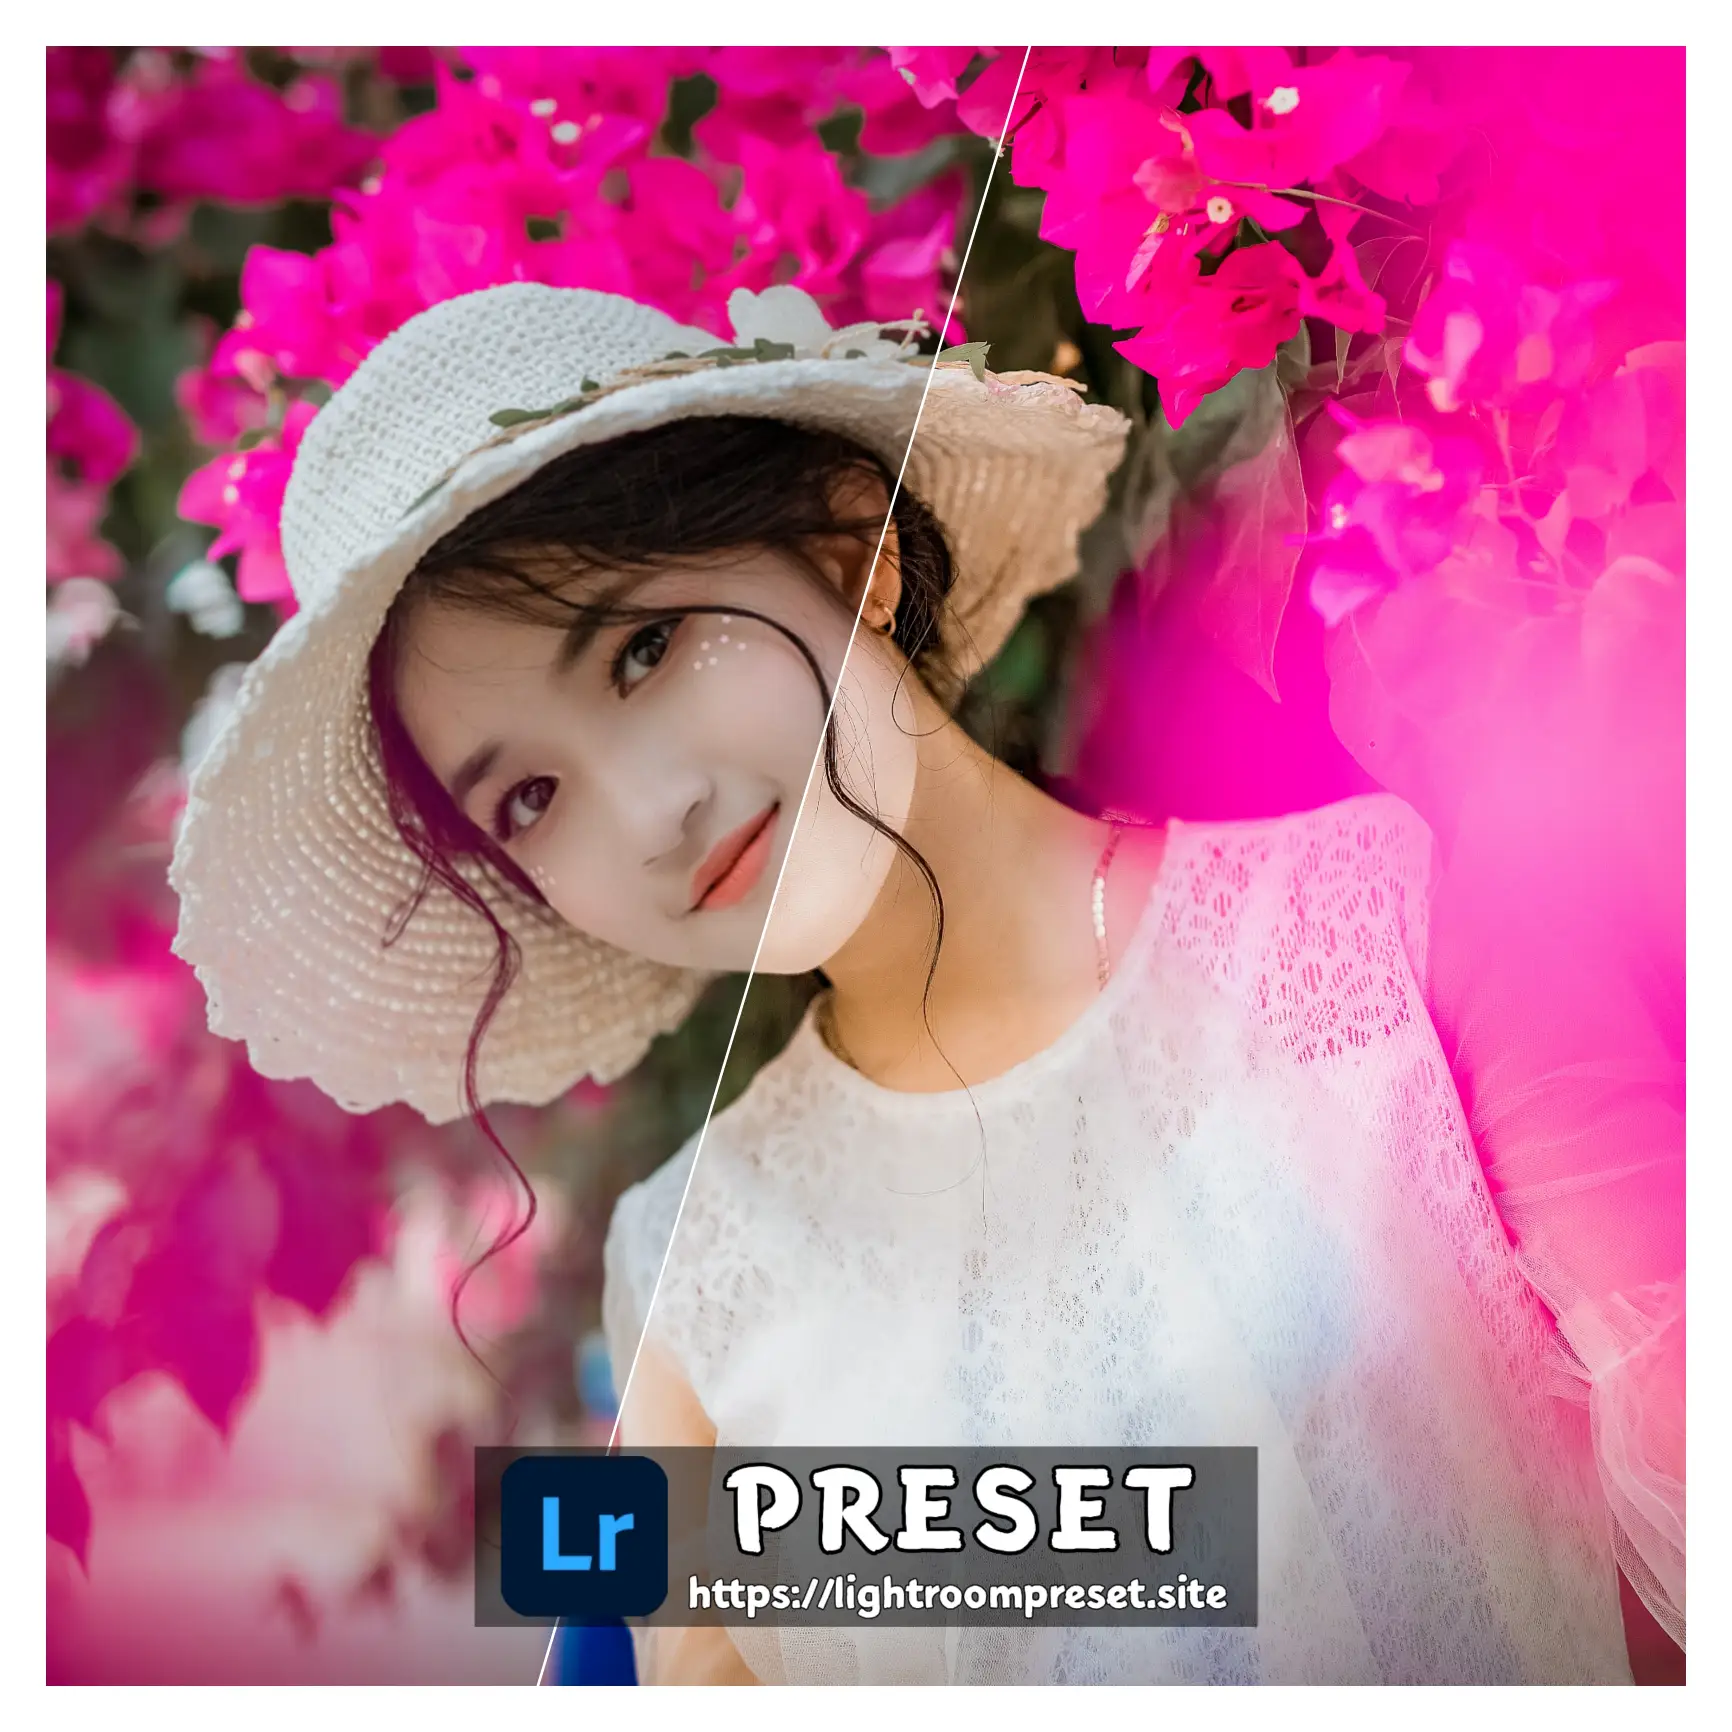 You are currently viewing Clean lightroom presets download free